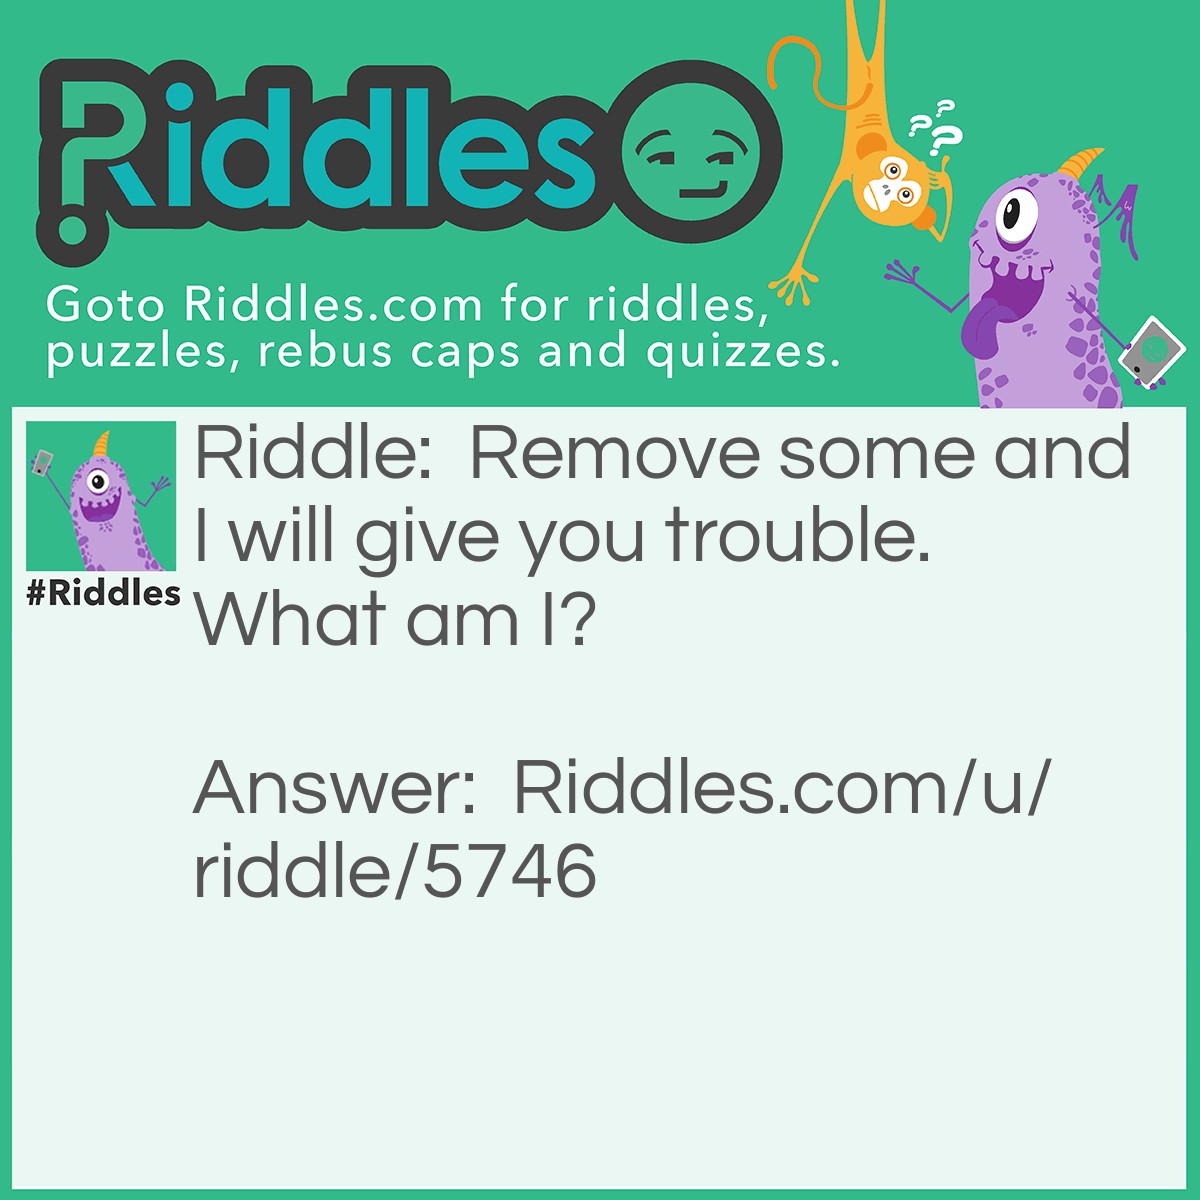 Riddle: Remove some and I will give you trouble. What am I? Answer: I am Troublesome.